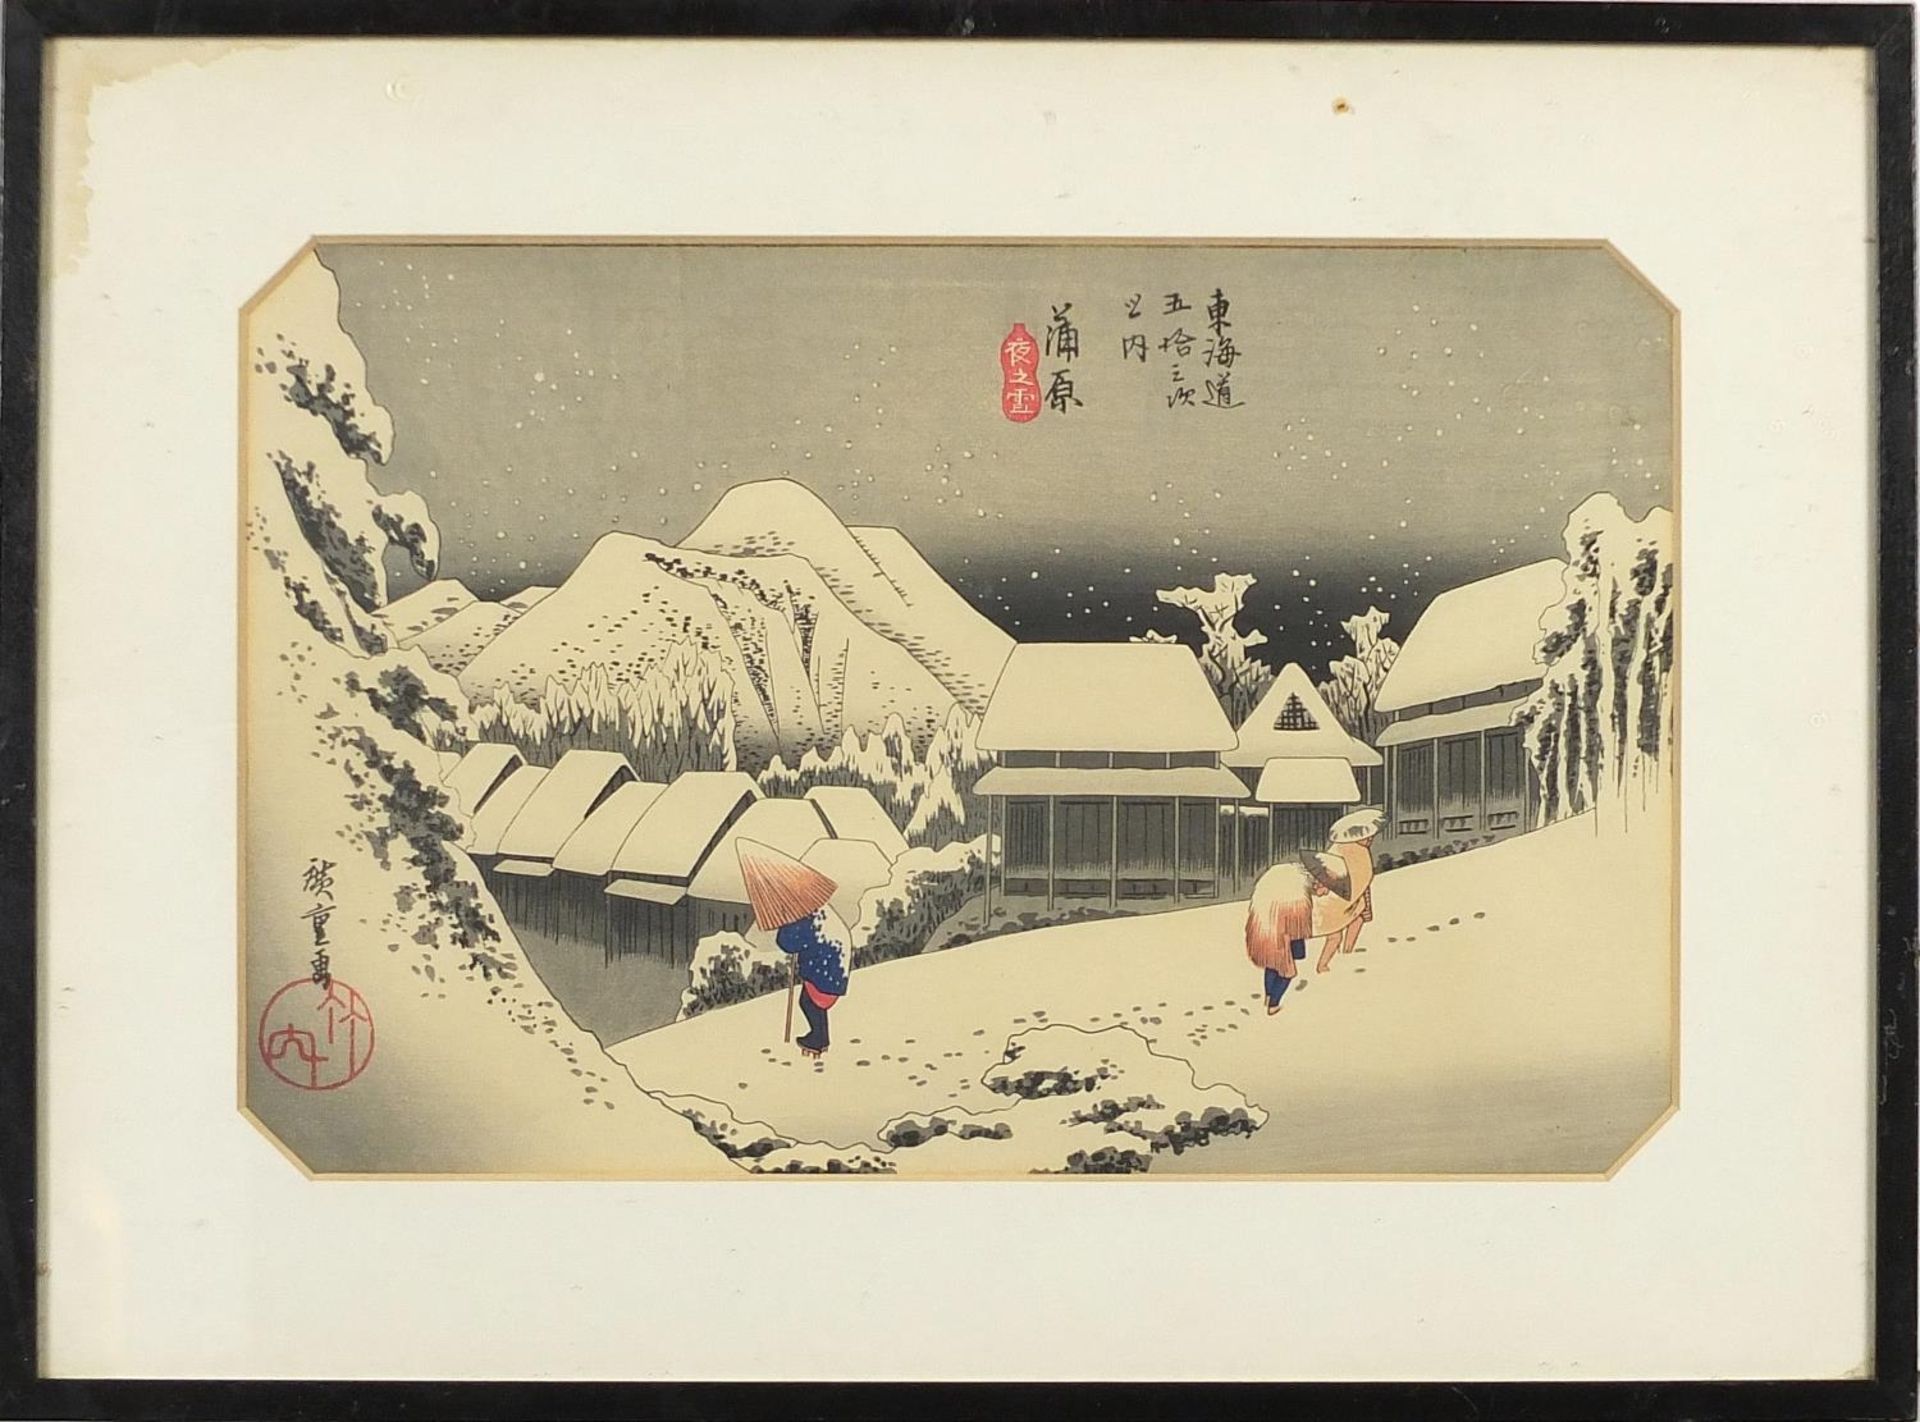 Hiroshige - Kanbara in snow, Japanese woodblock print, mounted, framed and glazed, 34.5cm x 22.5cm - Image 2 of 4